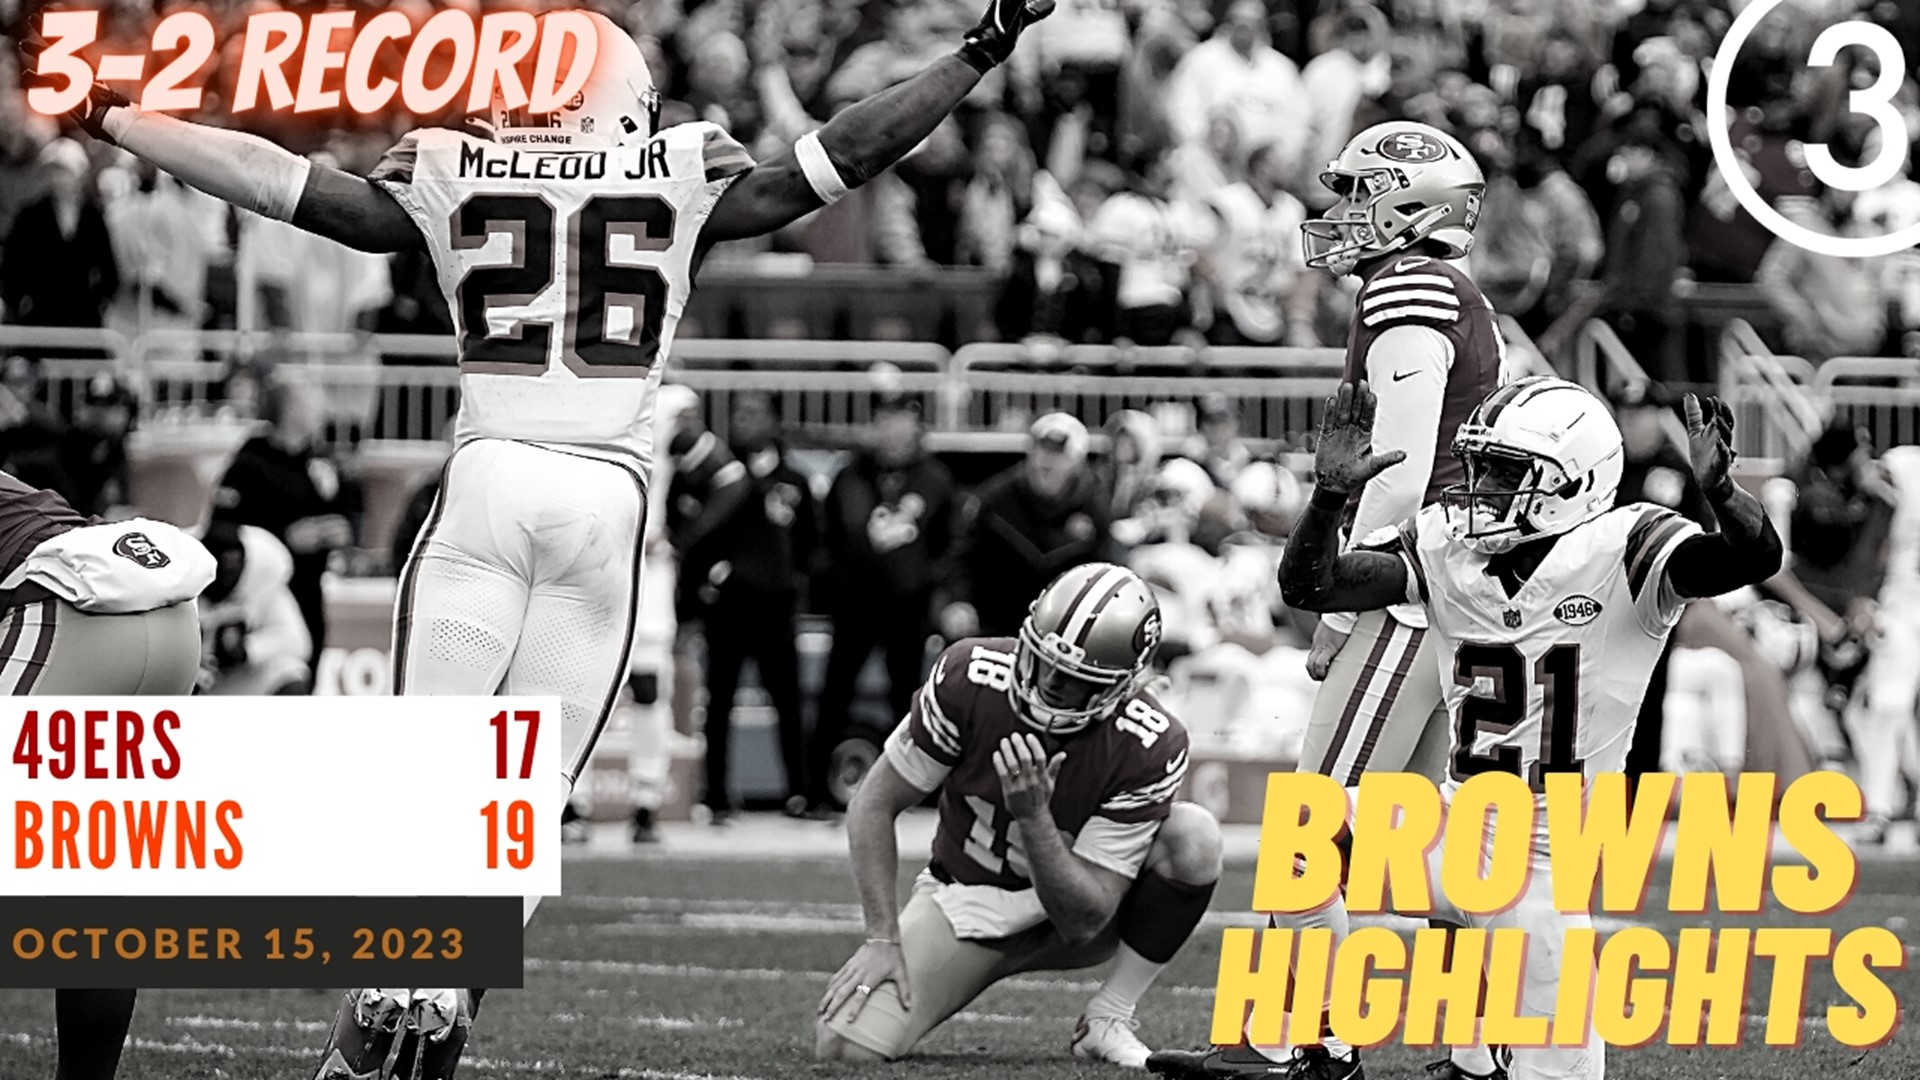 Without the services of Deshaun Watson or Joel Bitonio, Cleveland stunned the football world behind a stellar defensive effort to improve to 3-2 on the season.